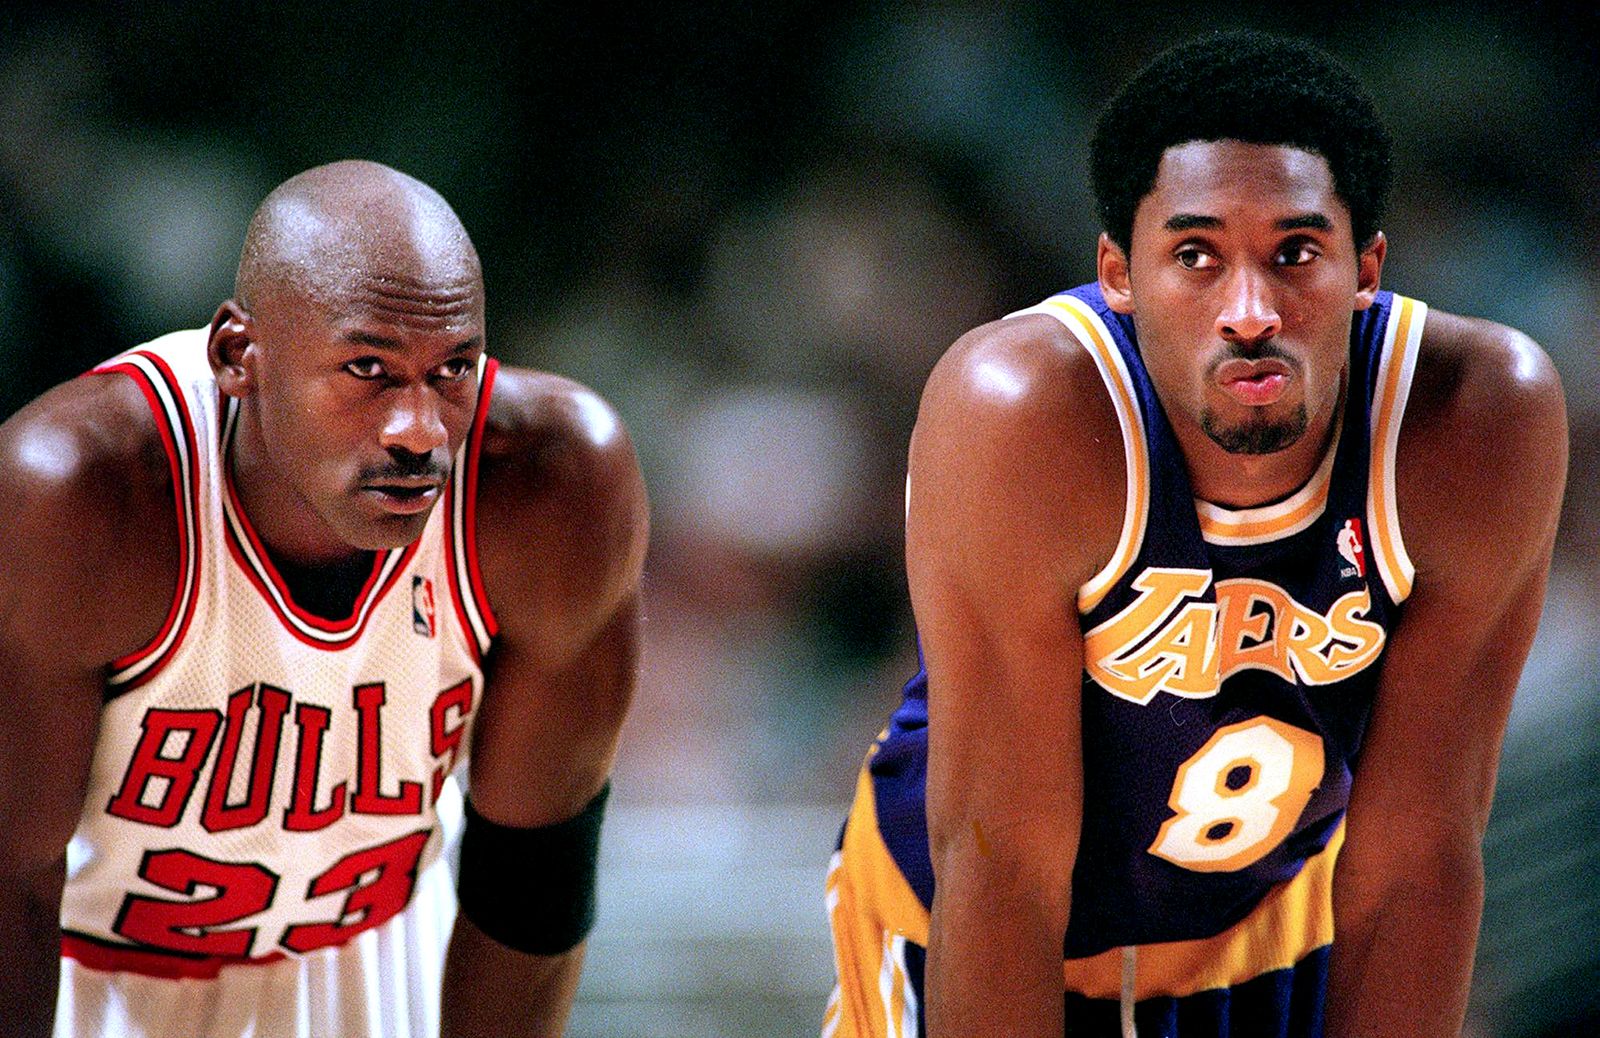 Michael Jordan shares final text messages he exchanged with Kobe Bryant |  CNN